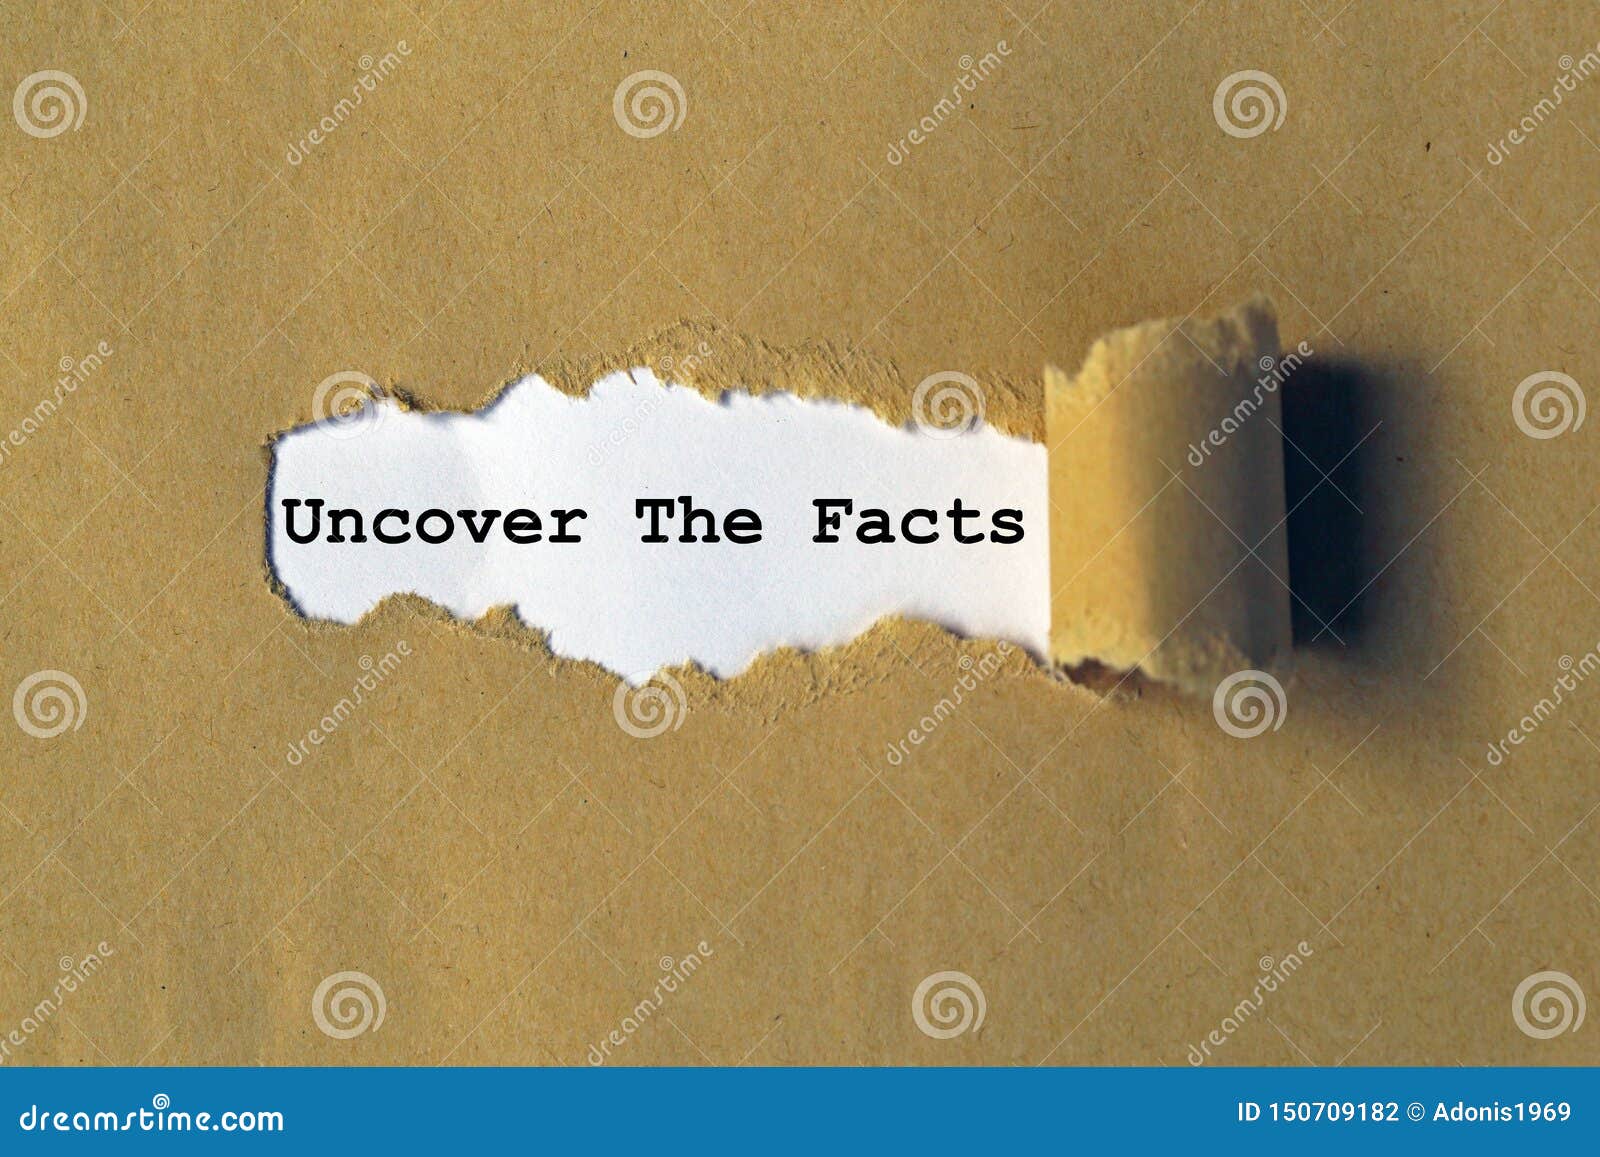 uncover the facts